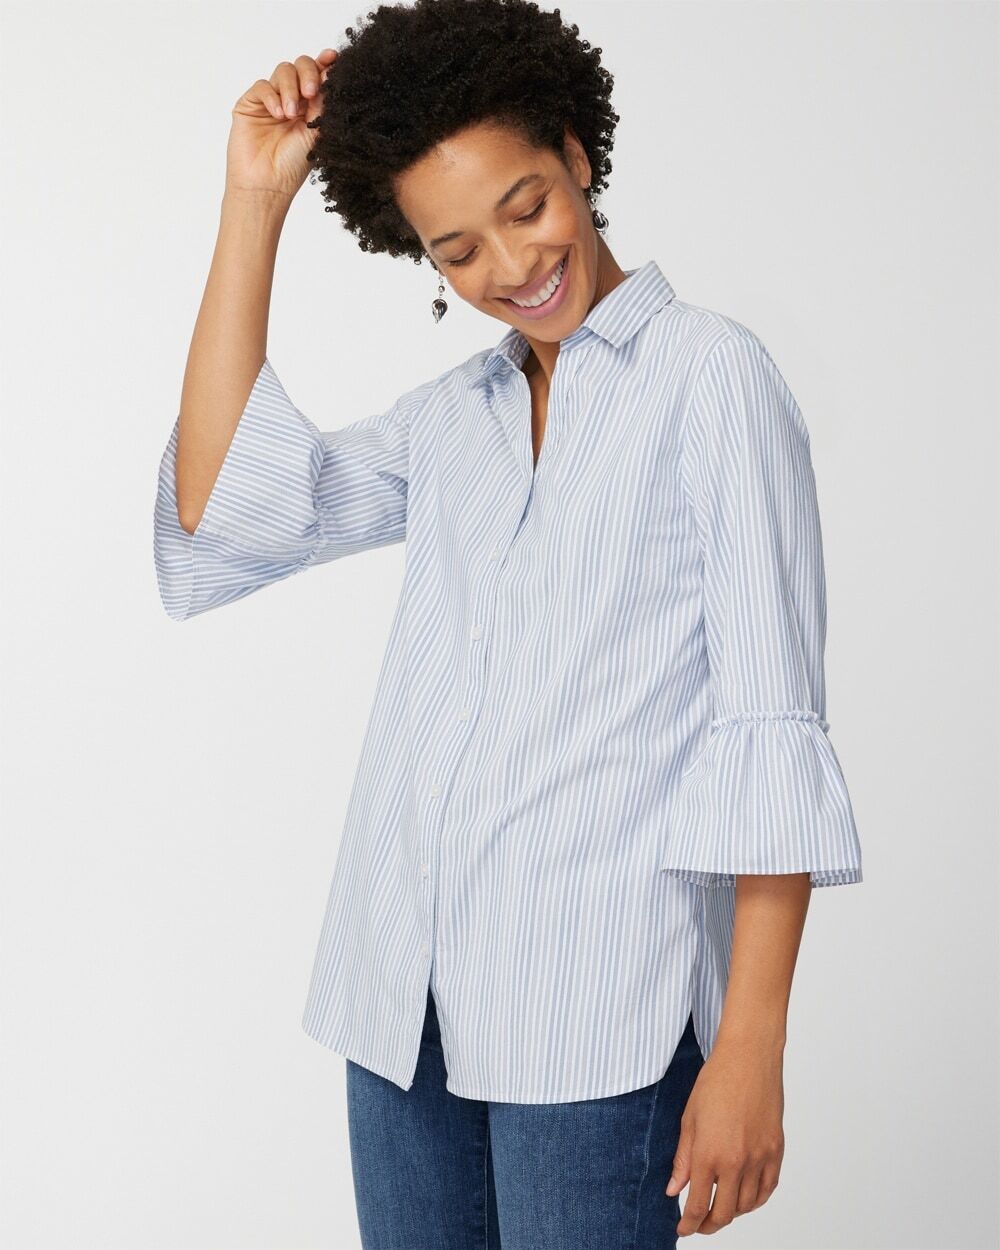 Chico's Off The Rack Women's Marin Co. Stripe Ruffle-Sleeve Button-Front Top in Ocean Drop Size 4 (20/22-XXL)   Chico's Outlet, Clearance Women's Clothing - Ocean Drop - Women - Size: 4 (20/22-XXL)